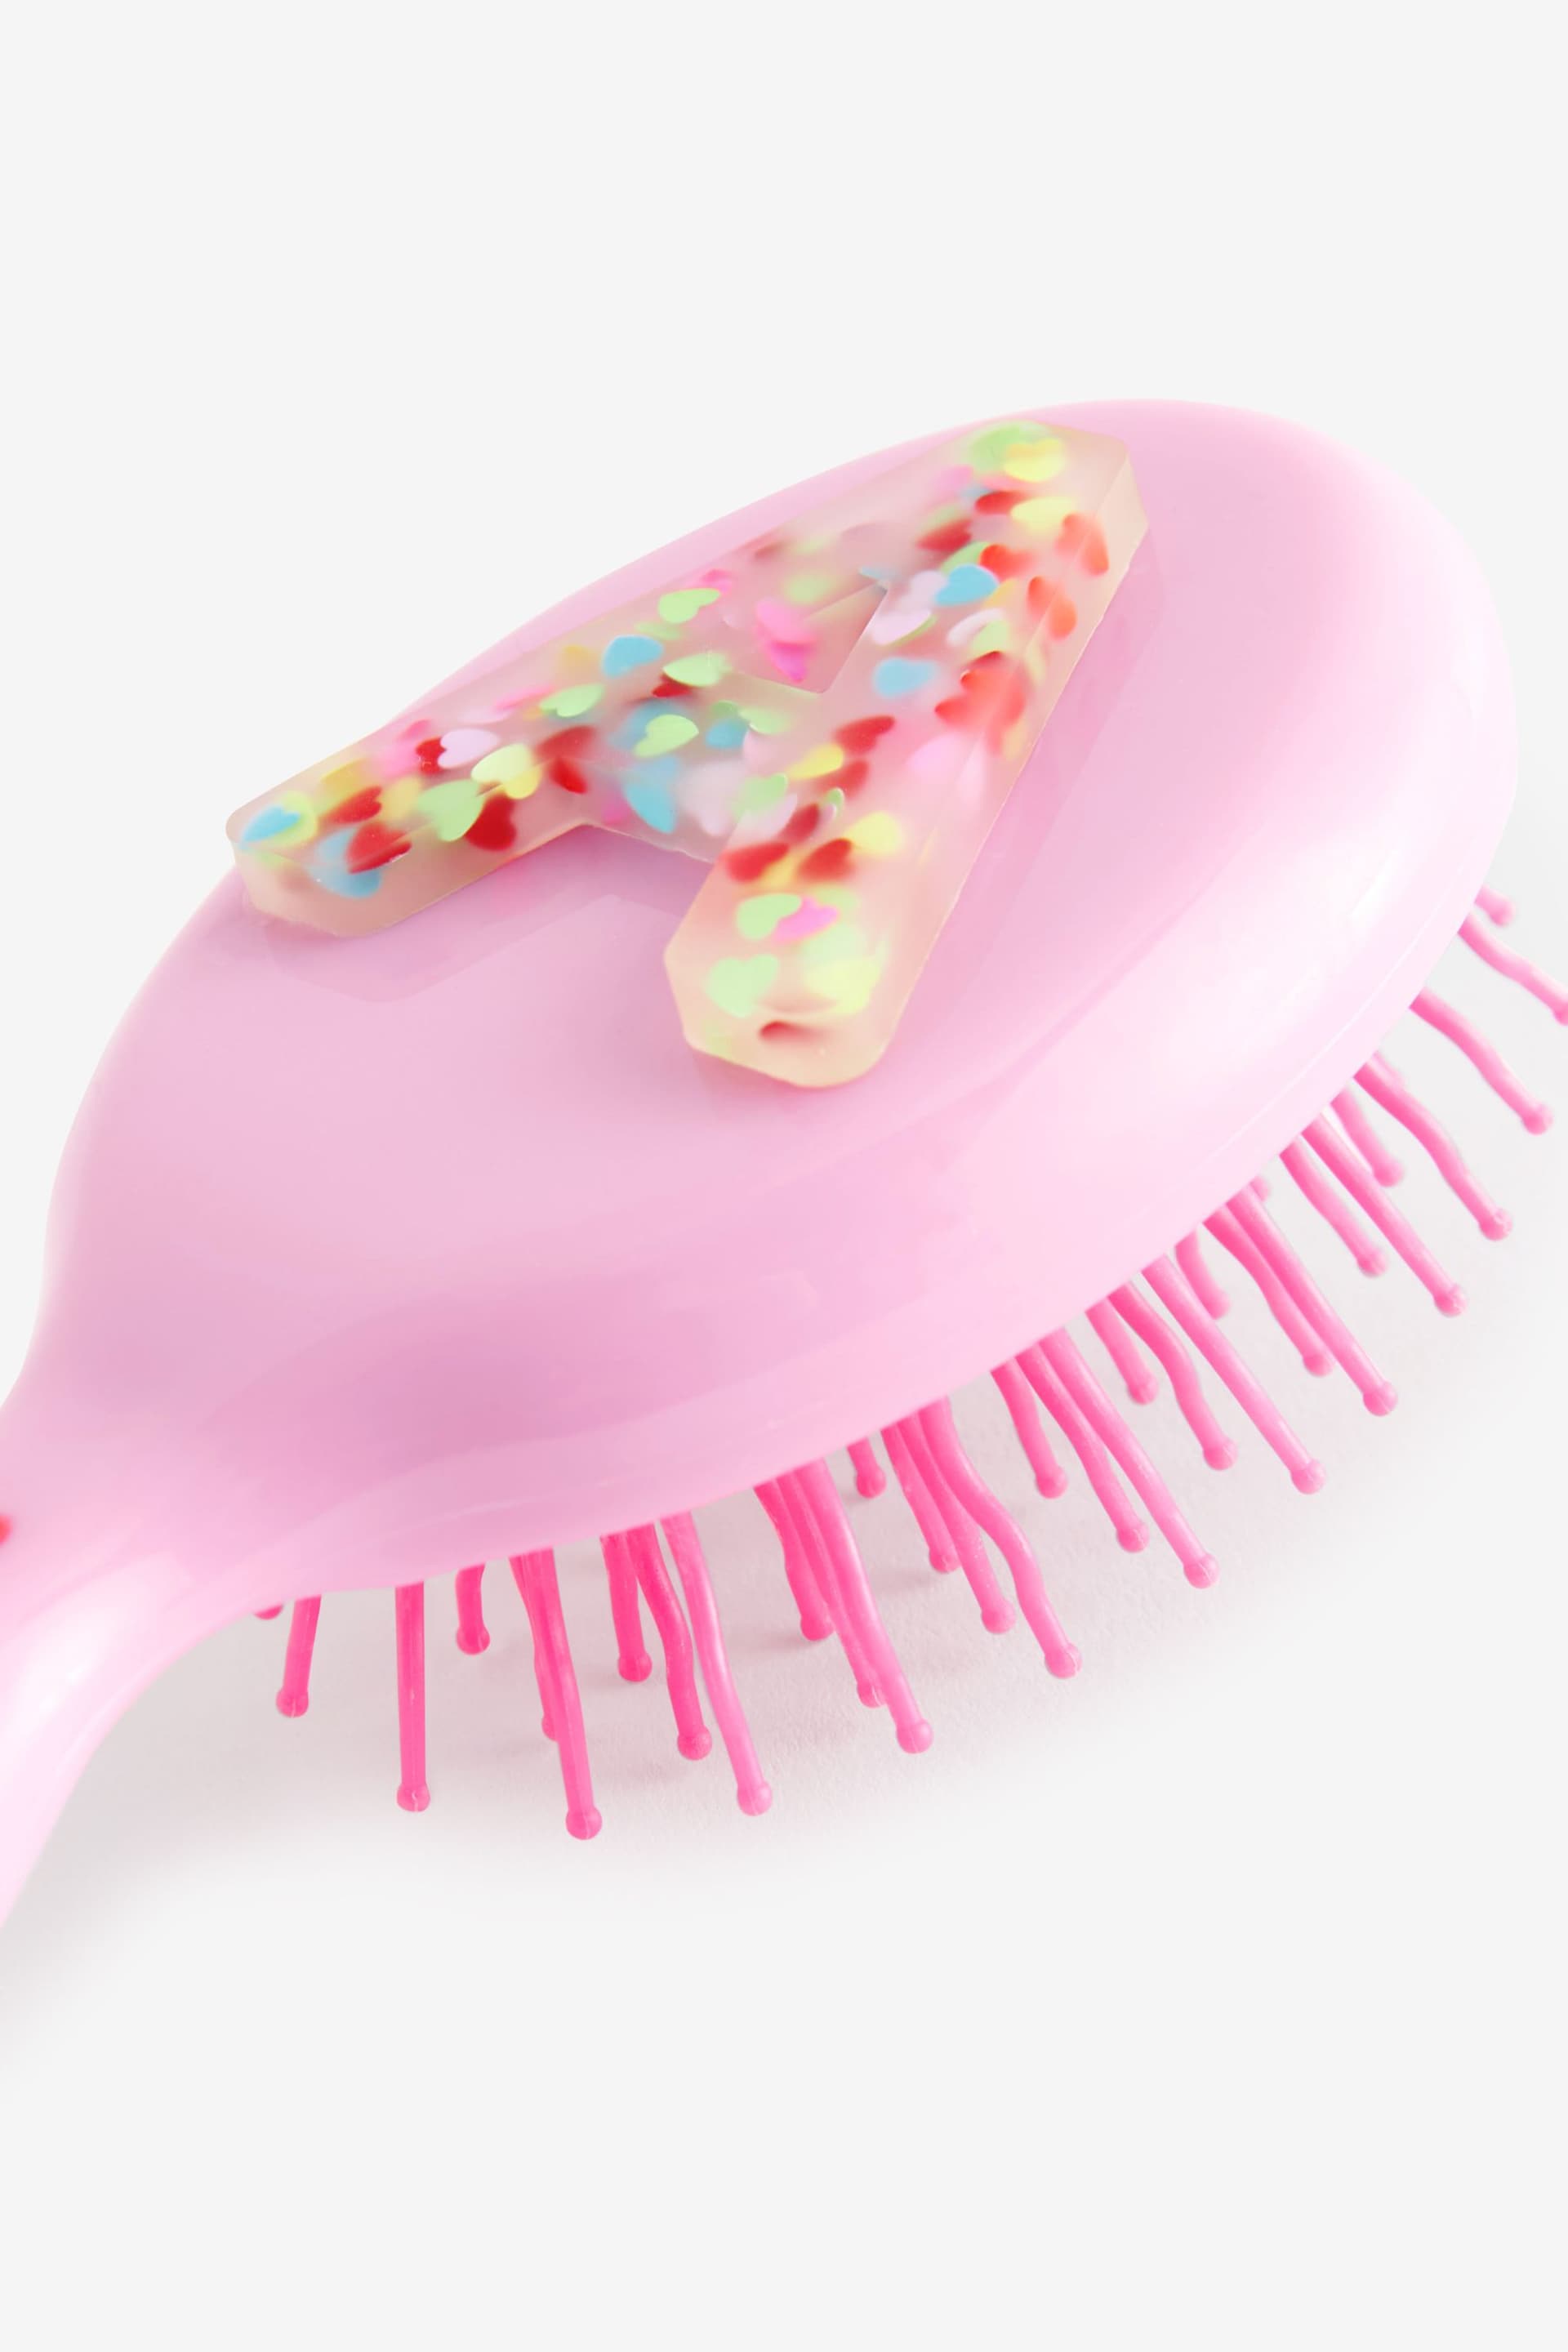 Bright Pink A Initial Hairbrush - Image 3 of 3